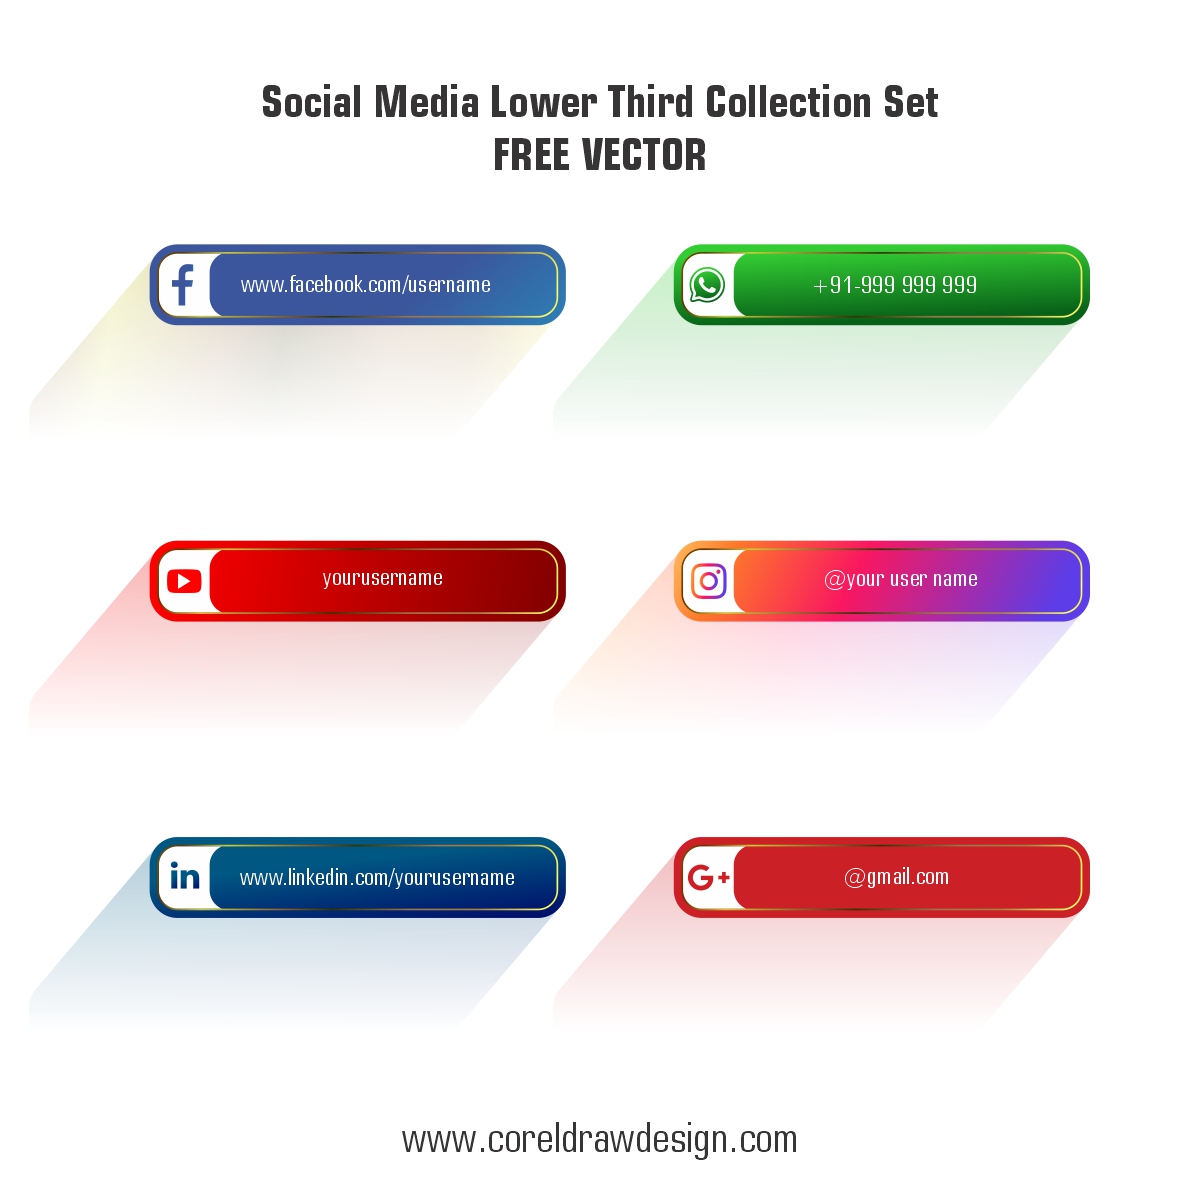 Social Media Lower Third Collection Set Free Vector